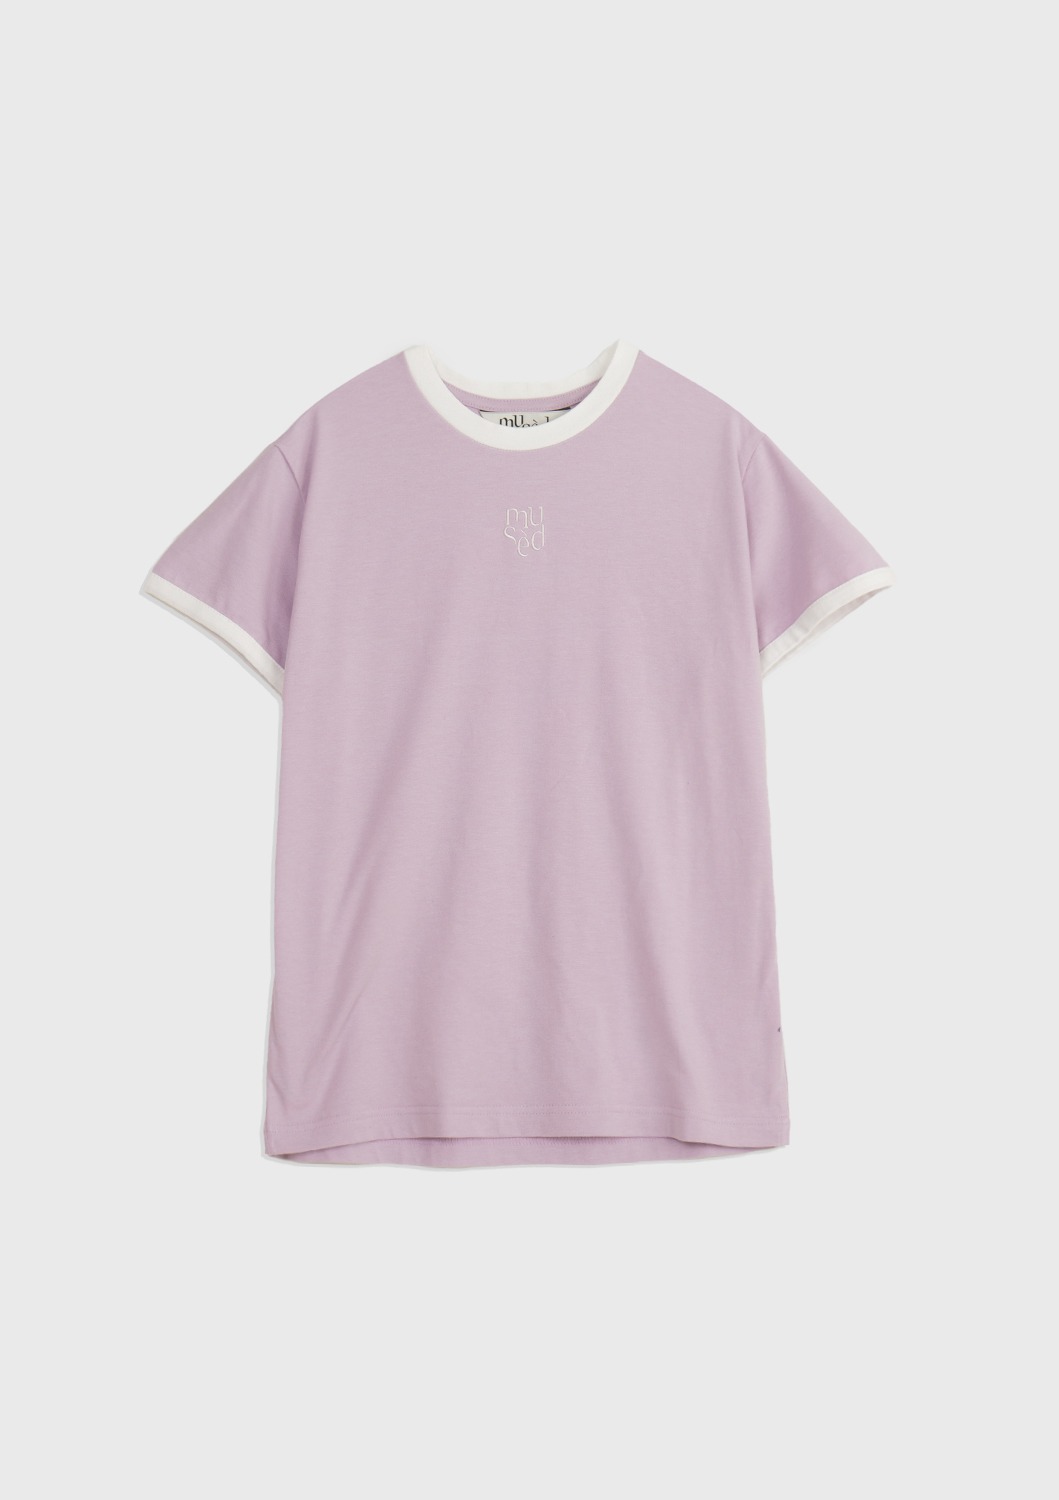 Contrast Rib Patched T-shirt - Lavender